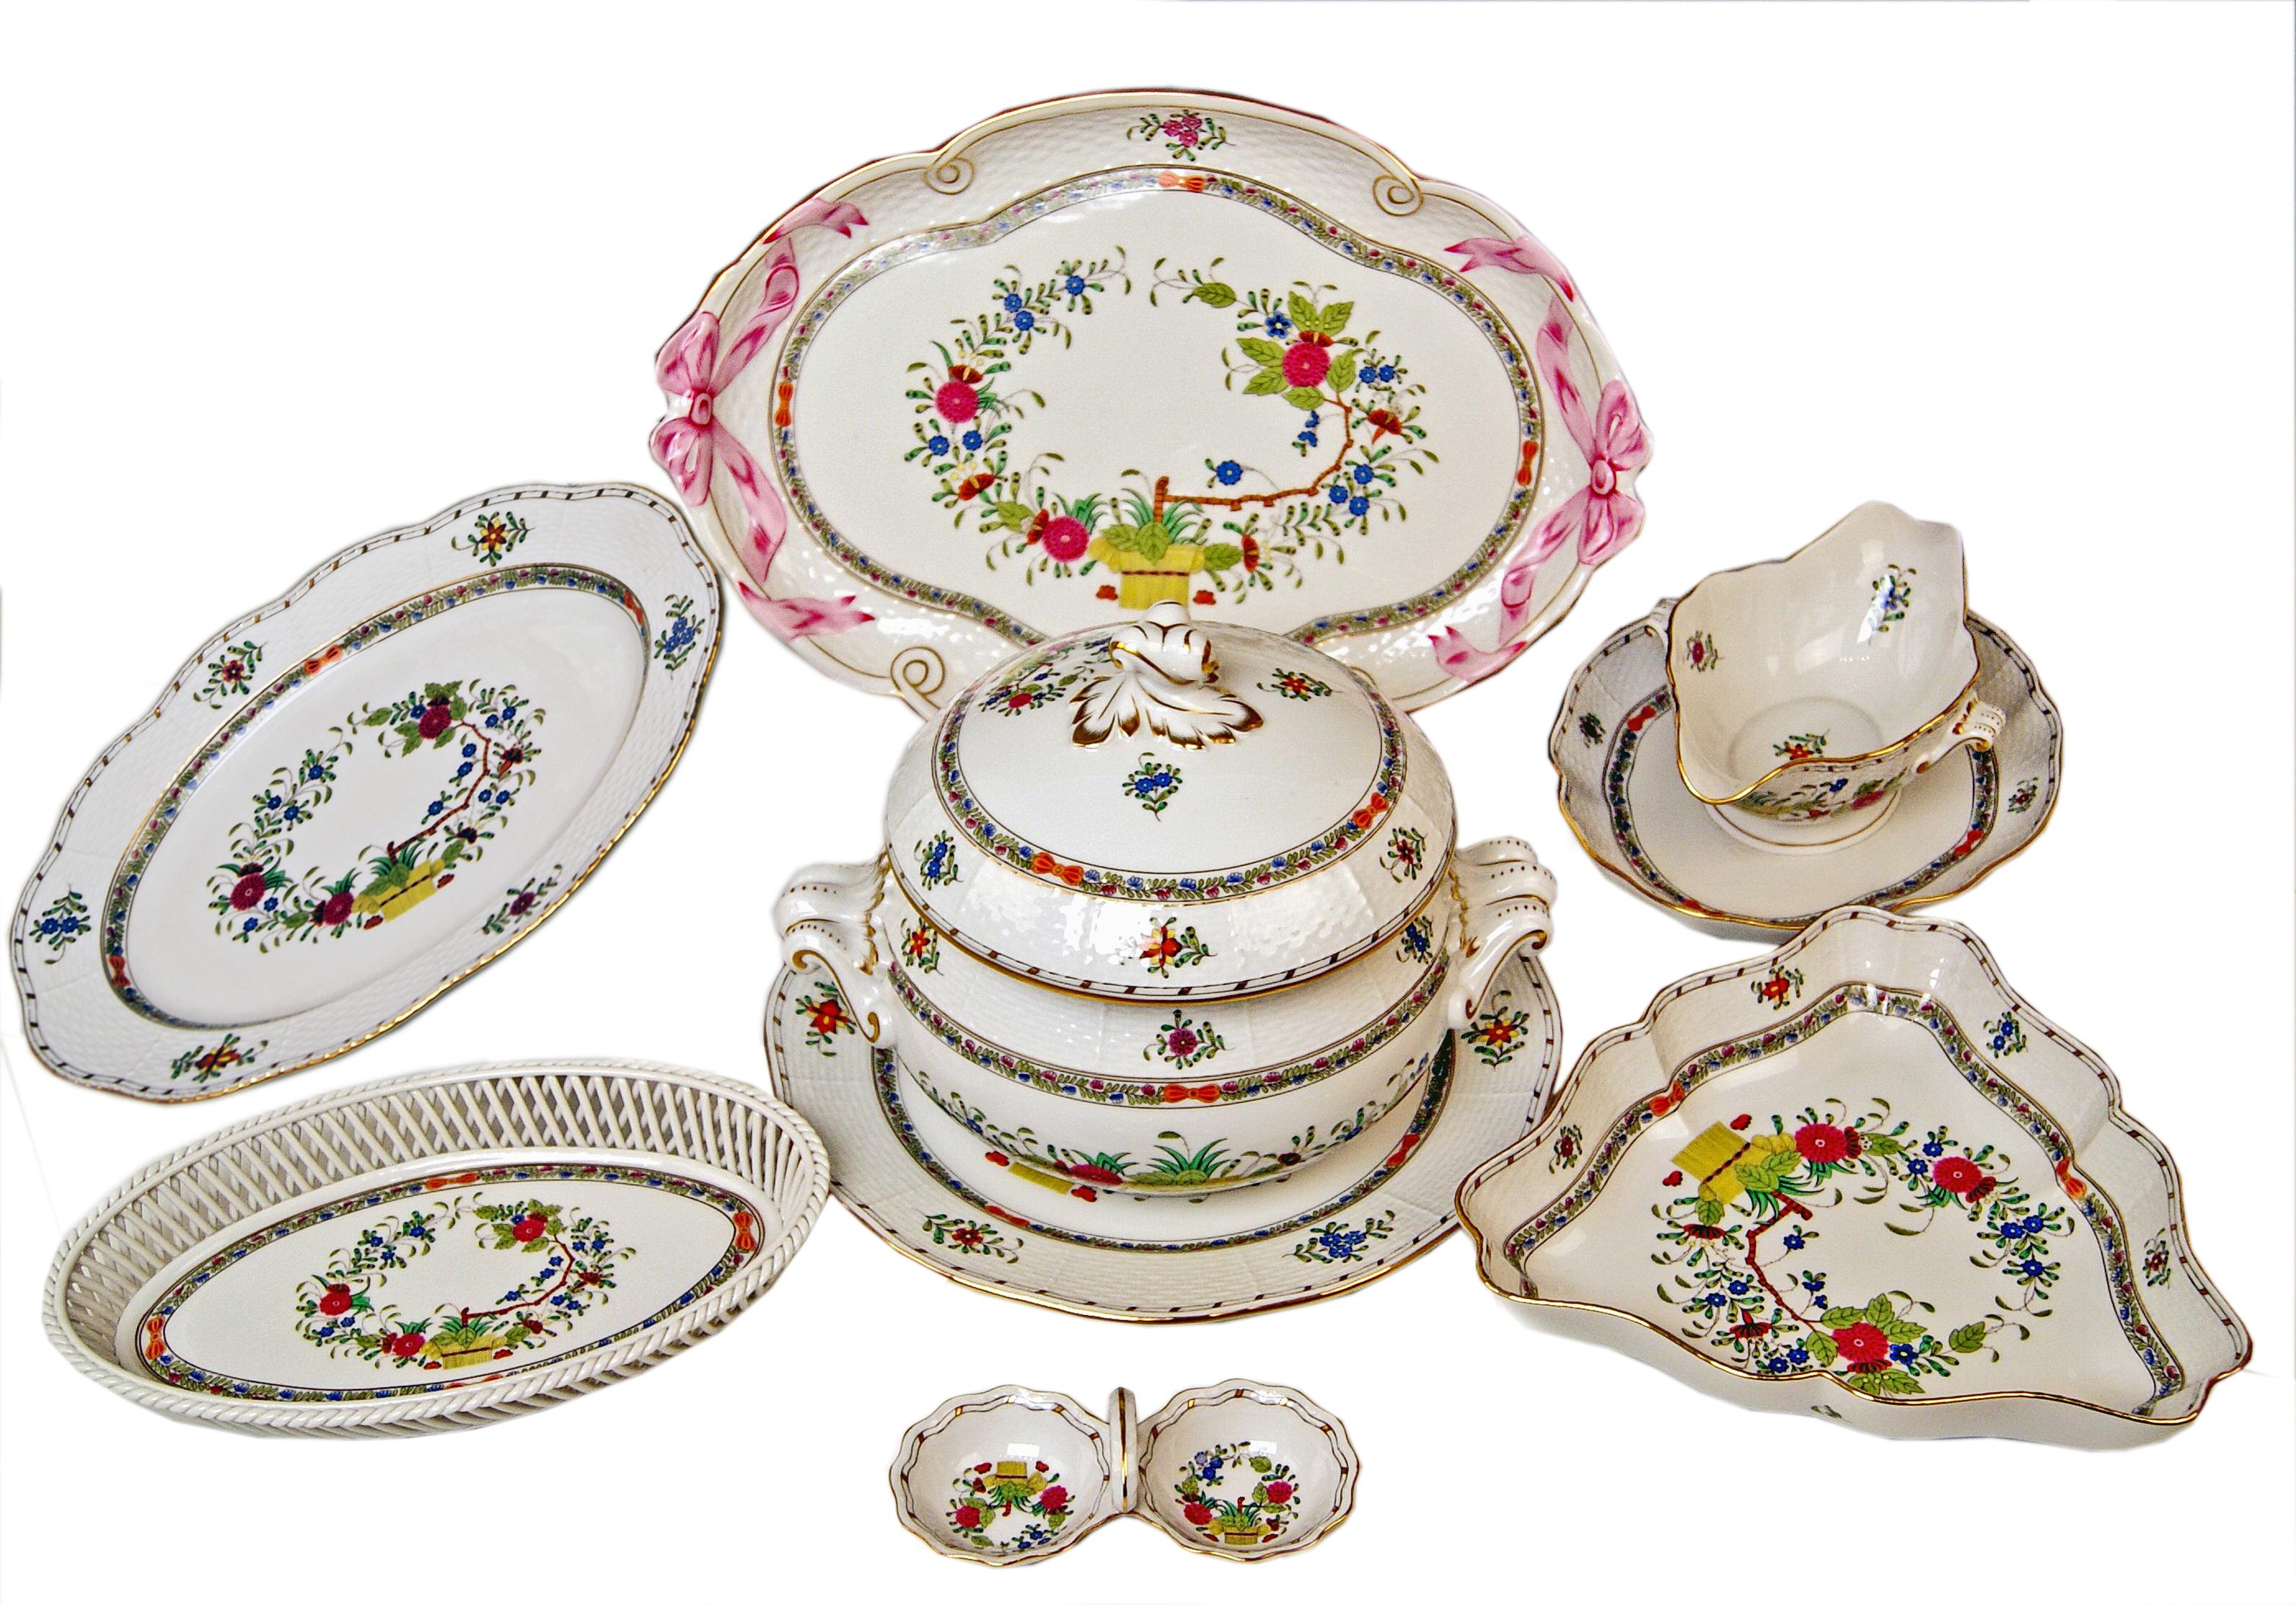 We invite you here to look at a splendid as well as nicest Herend dinner set for twelve persons: 
This dinner set is of finest elegance due to its delicate flower paintings / finally stunning appearance, too, due to golden painted edges, circa